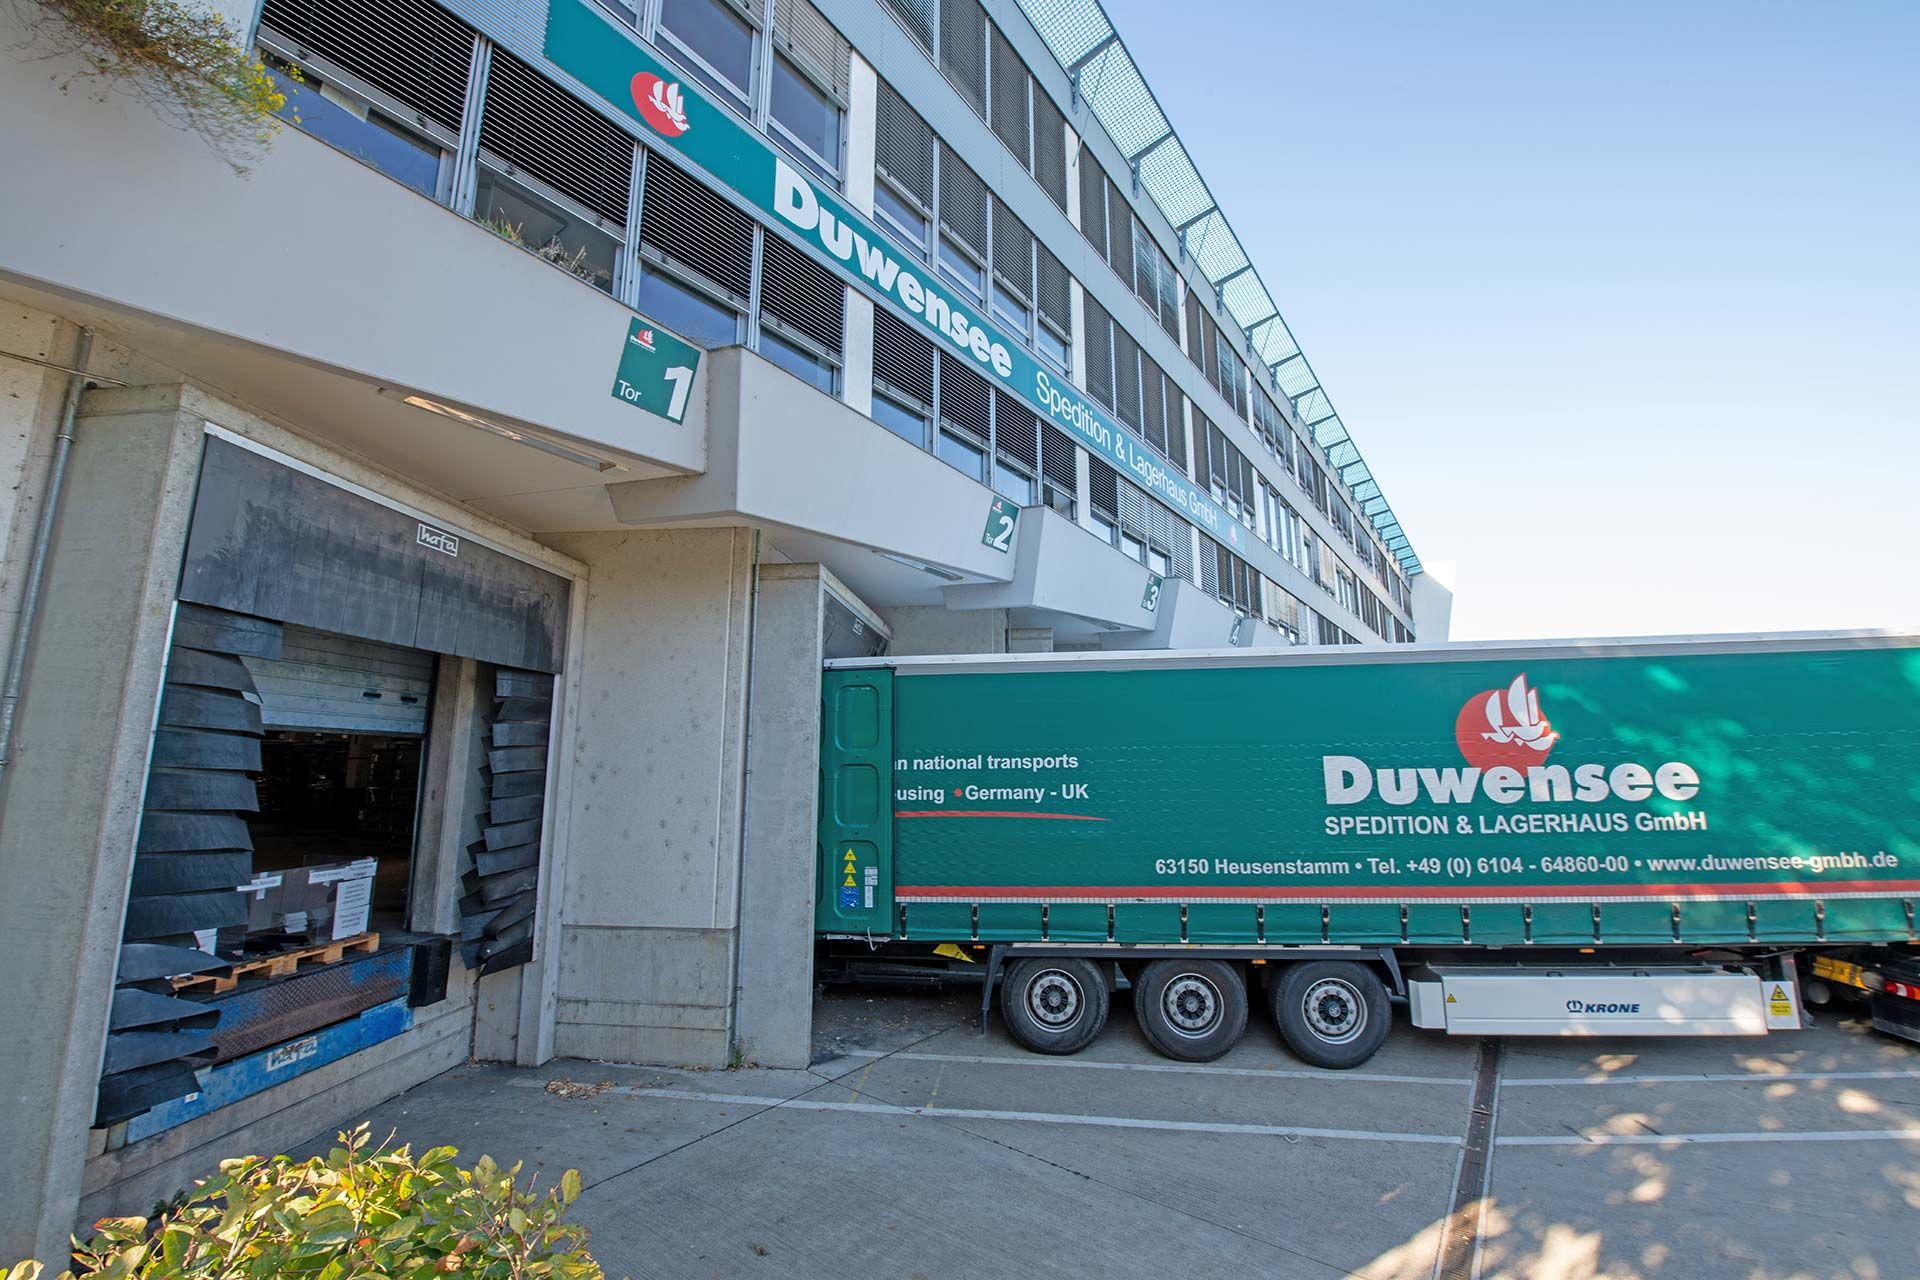 the services of Duwensee Spedition & Lagerhaus GmbH